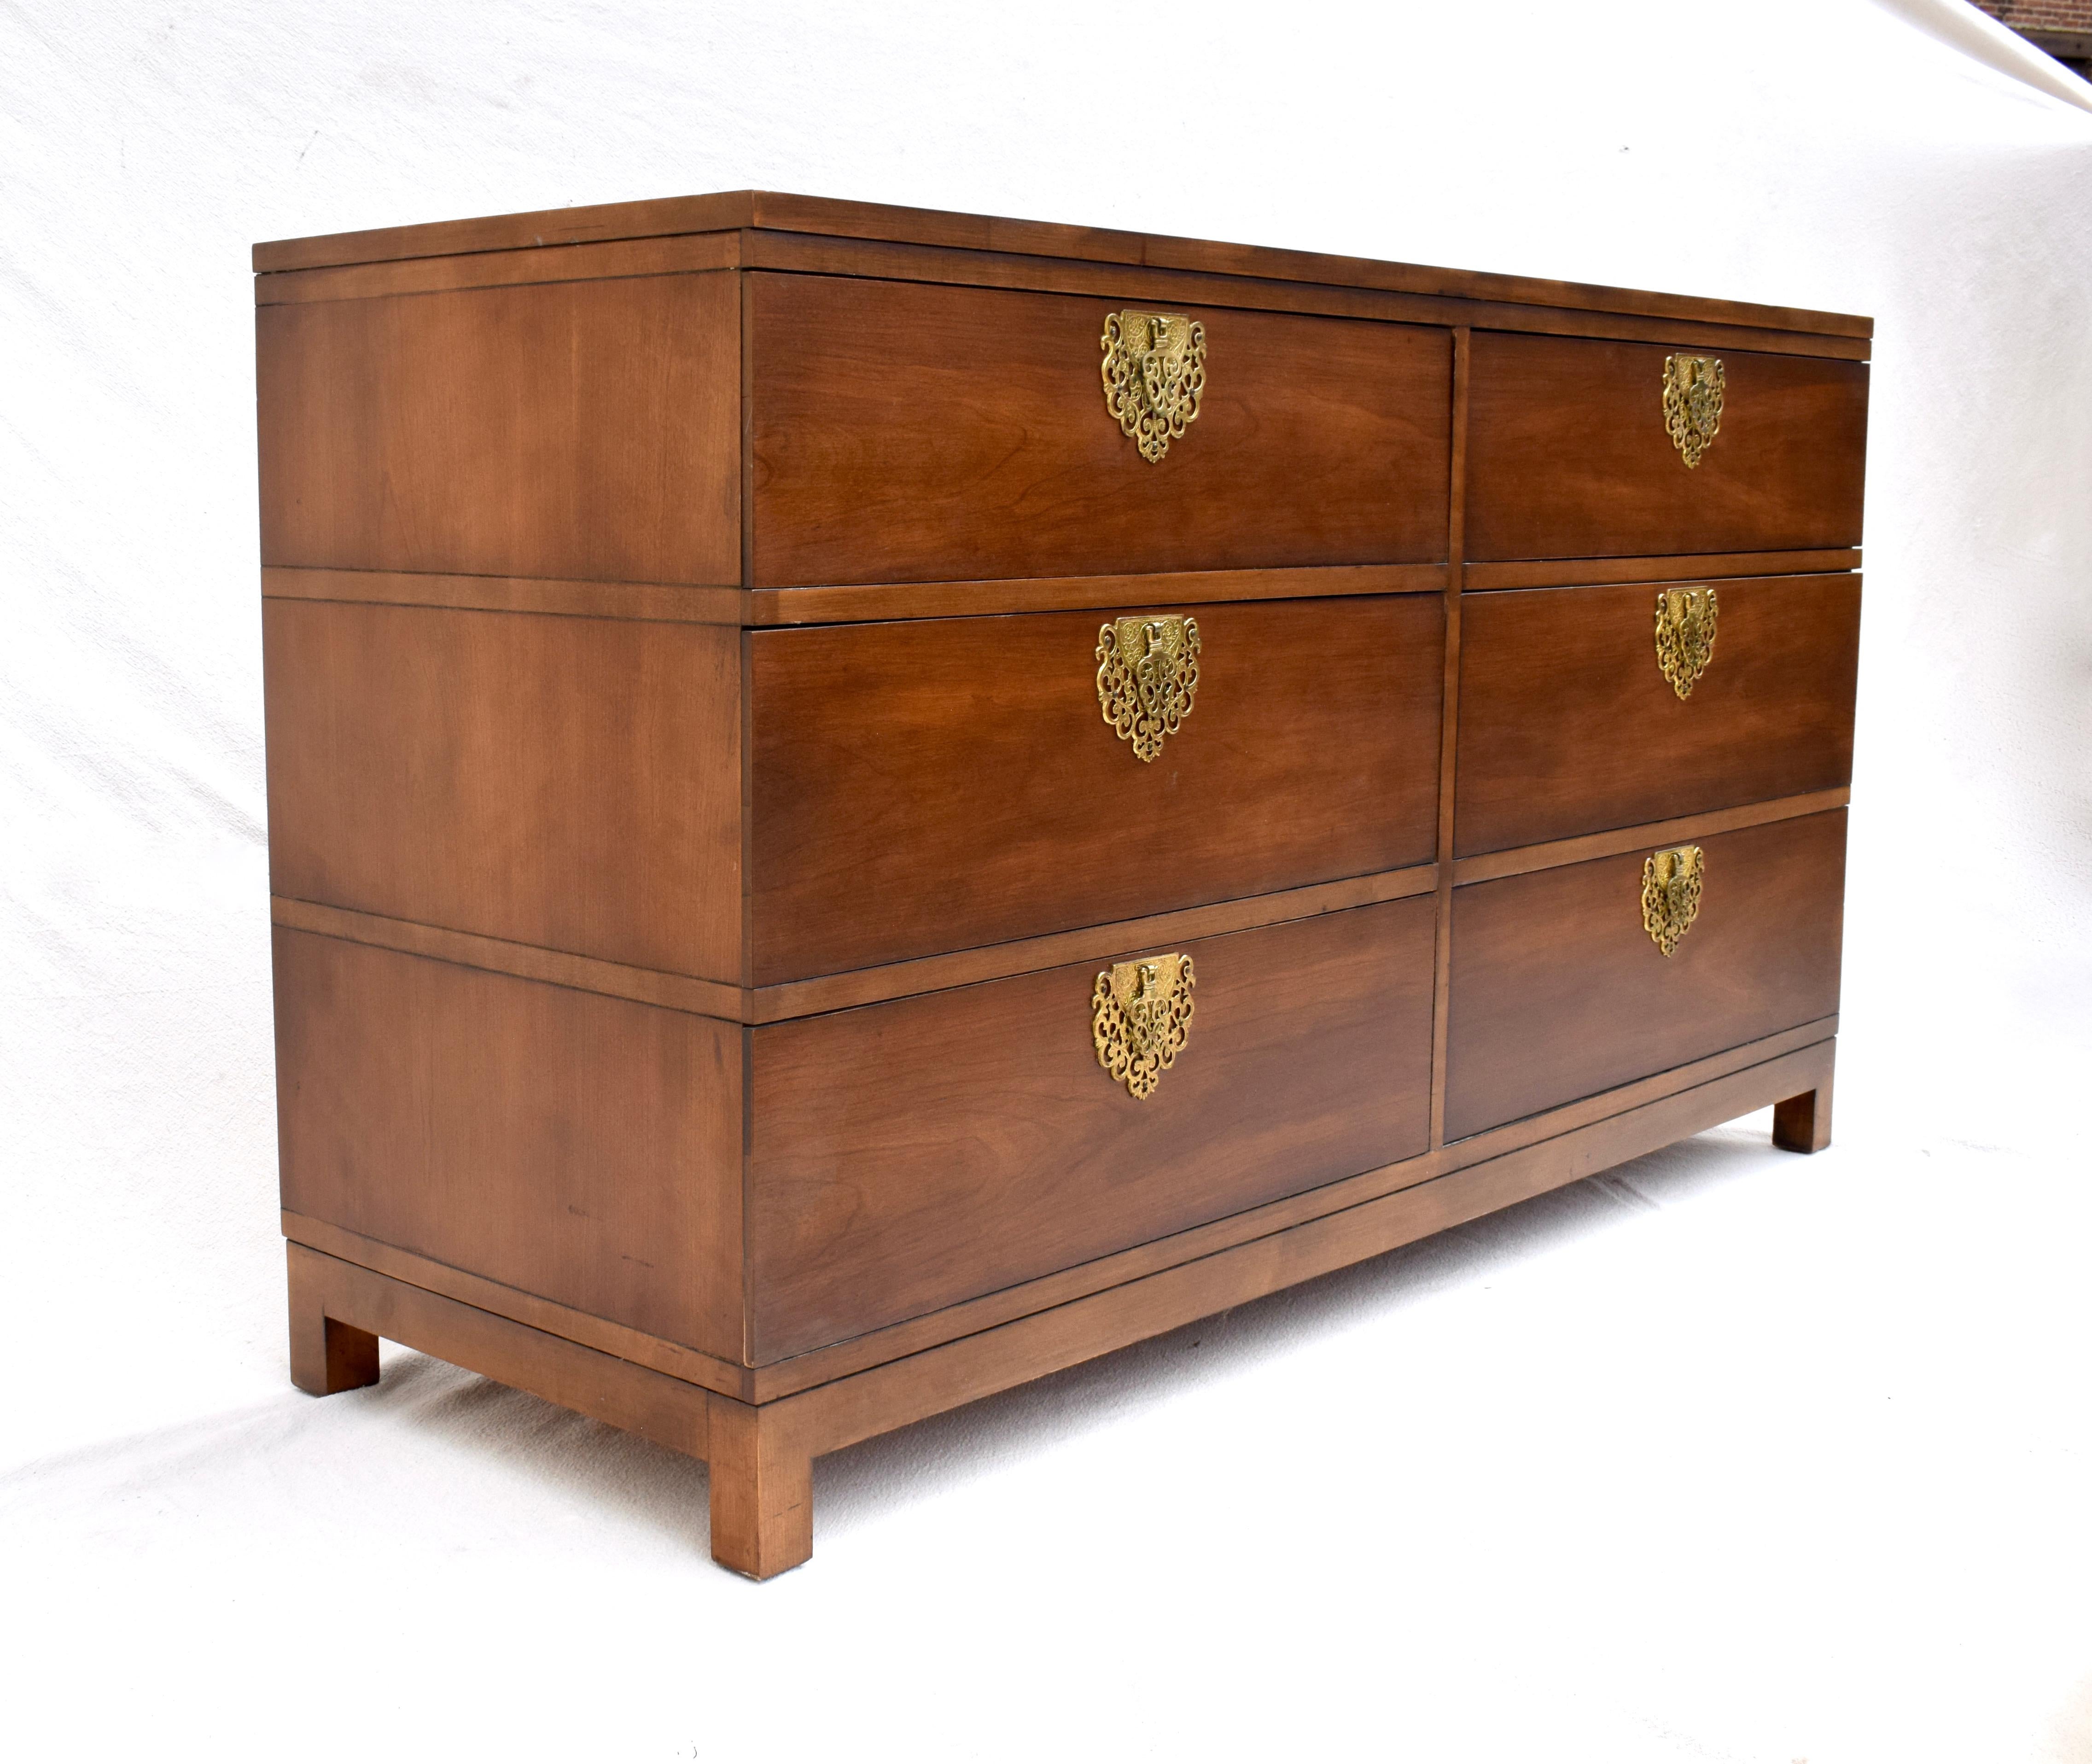 1950's refinished six dovetailed drawer lowboy chest of drawers by Drexel Heritage, scarcely seen with understated Tansu, Pan Asian & Campaign design influences.